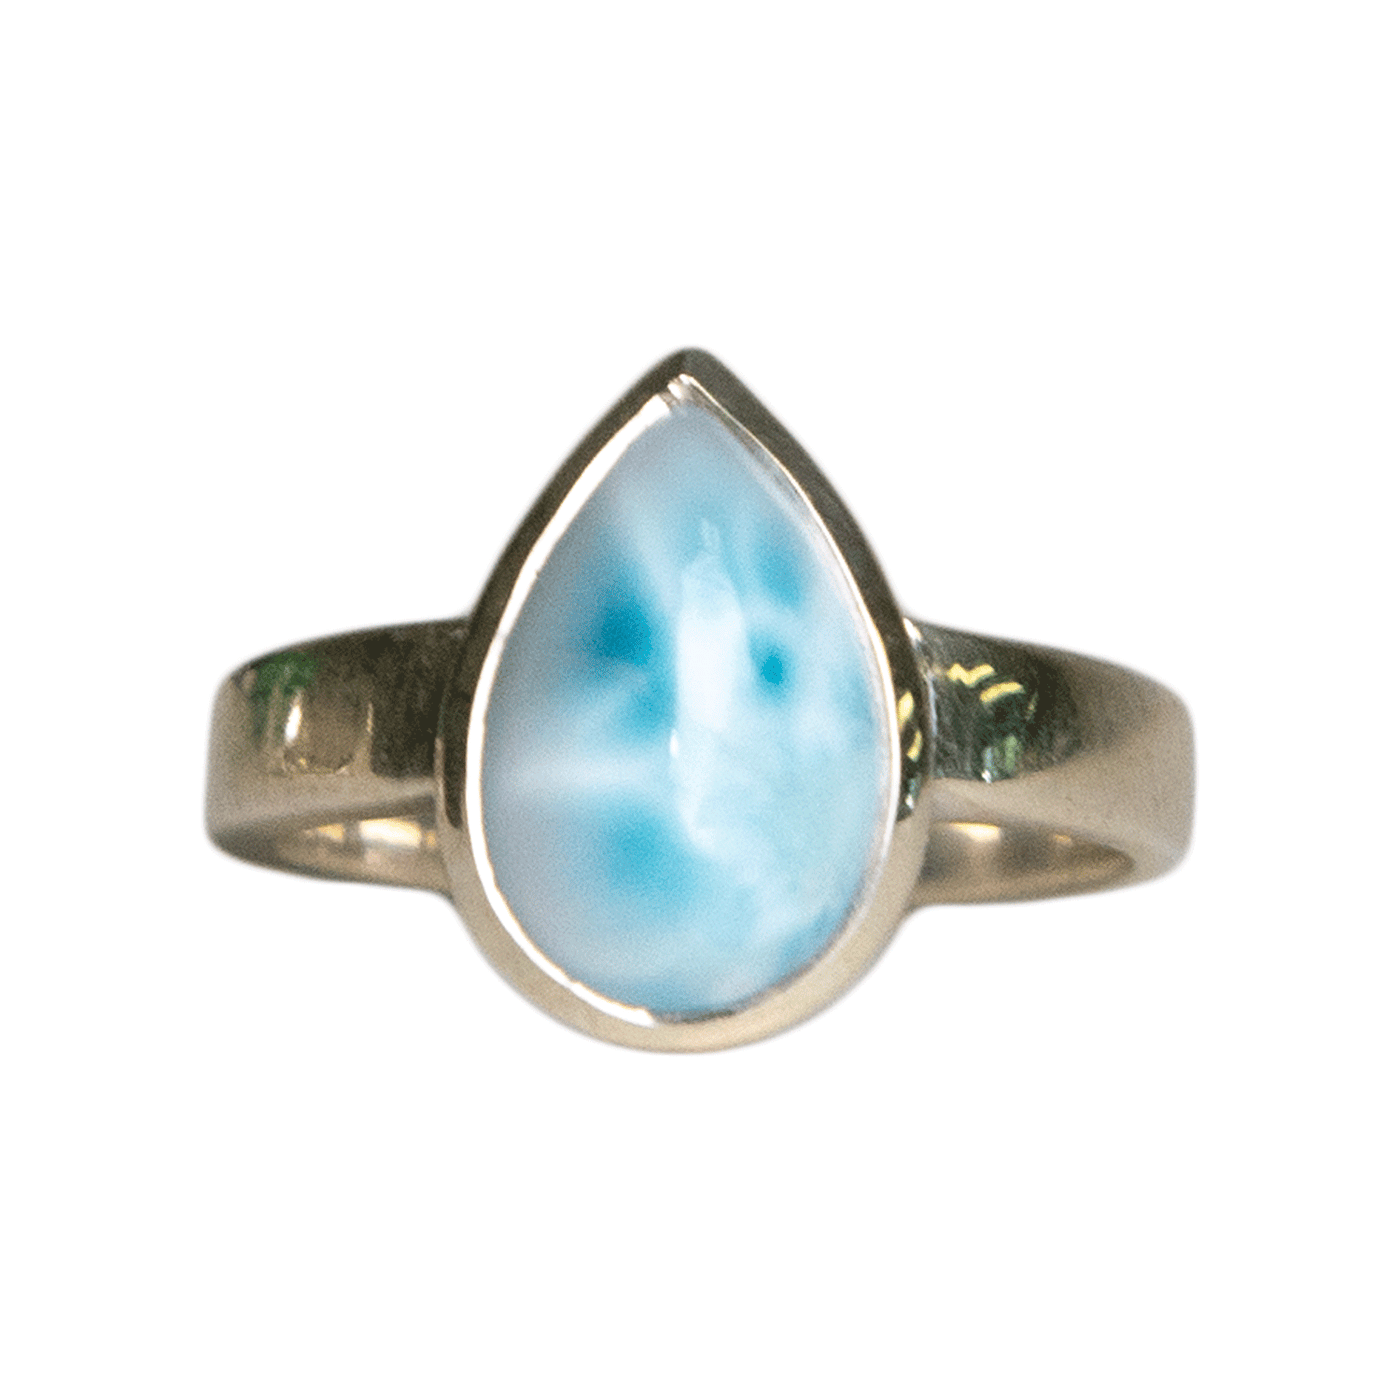 product view of genuine Larimar teardrop shaped crystal ring in sterling silver band by Energy Muse